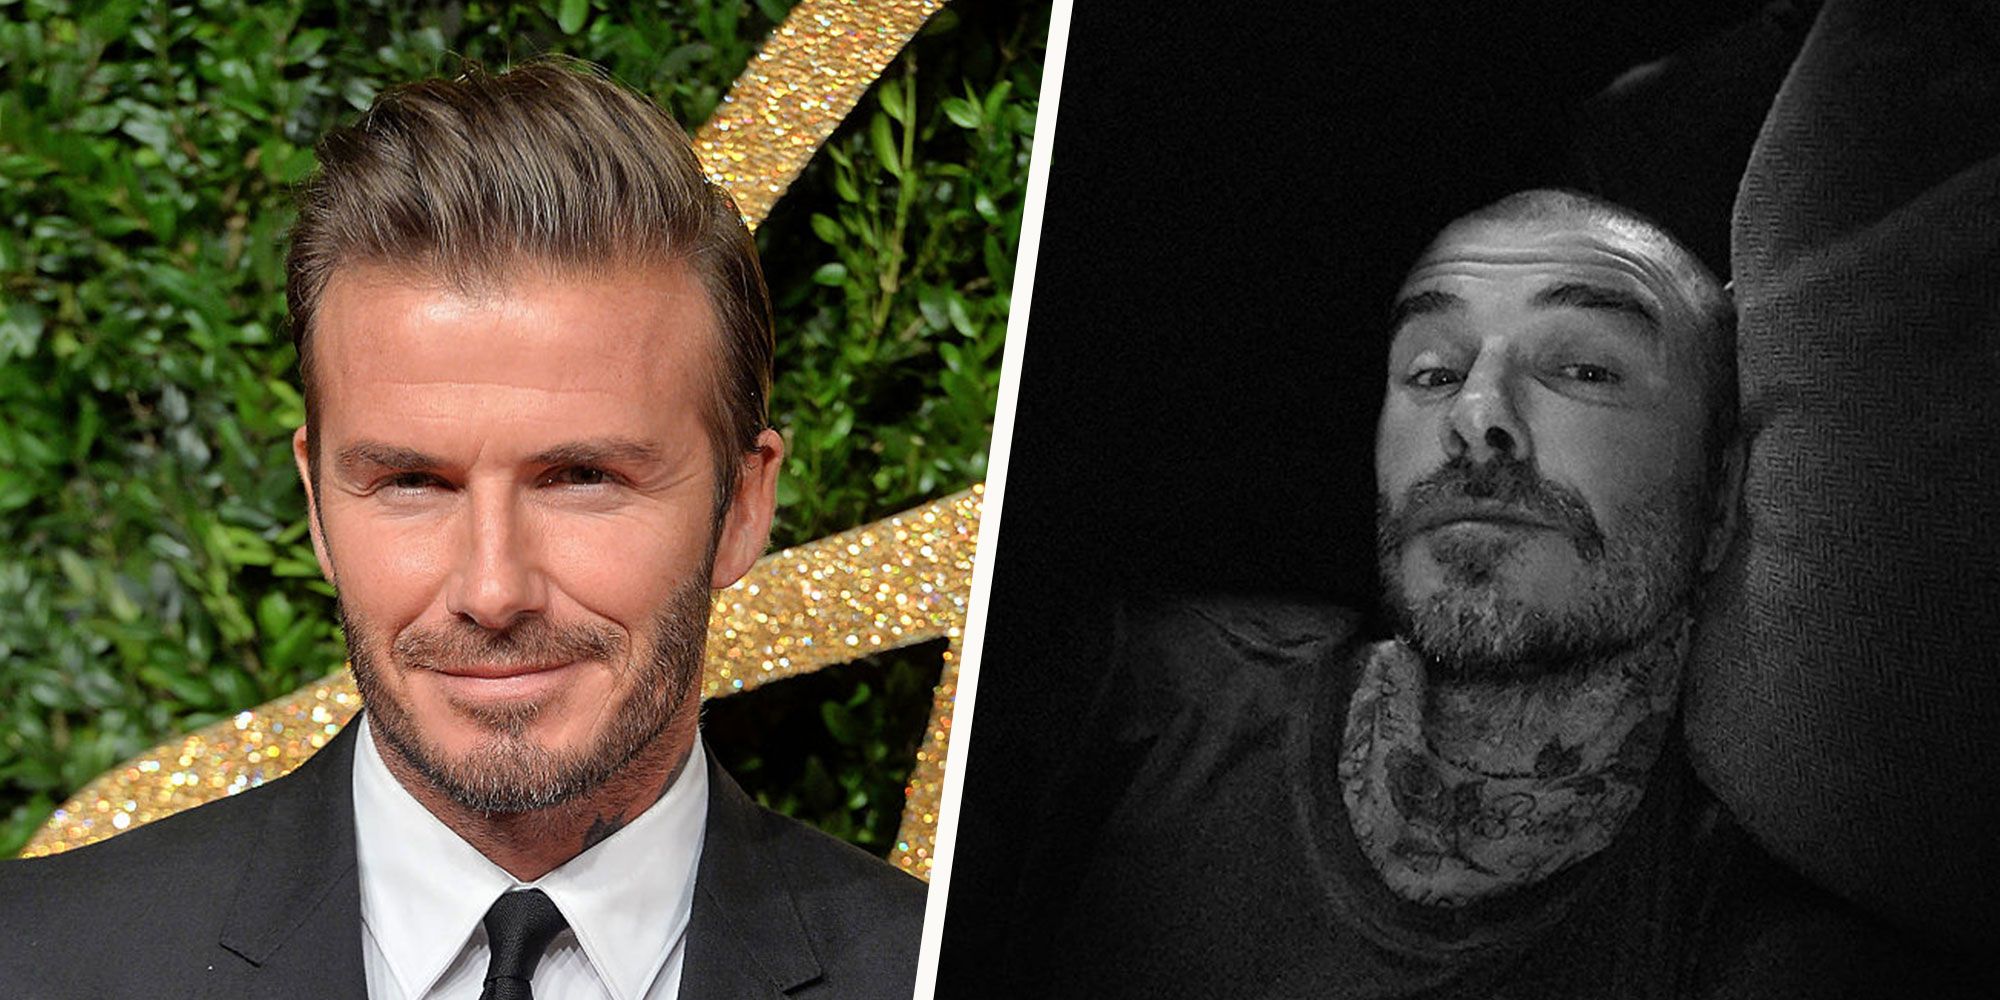 David Beckham Becomes the Latest Celebrity to Shave off His Hair